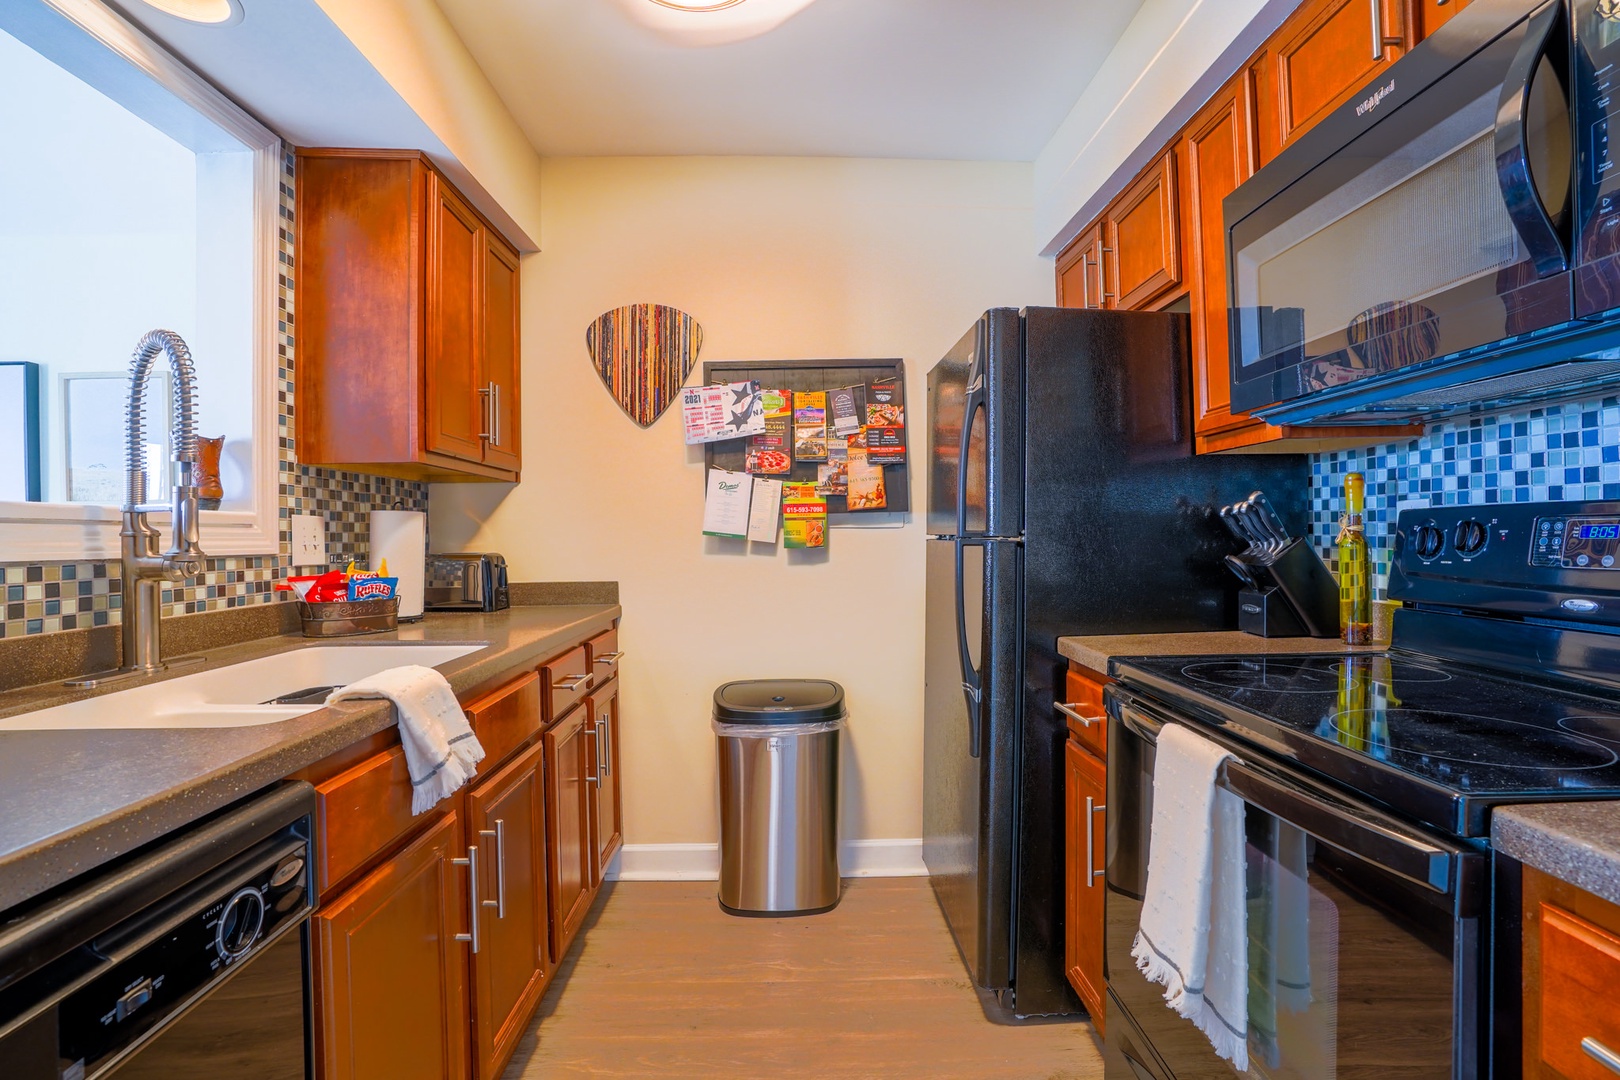 Kitchen with toaster, drip coffee maker, dishwasher, blender and more